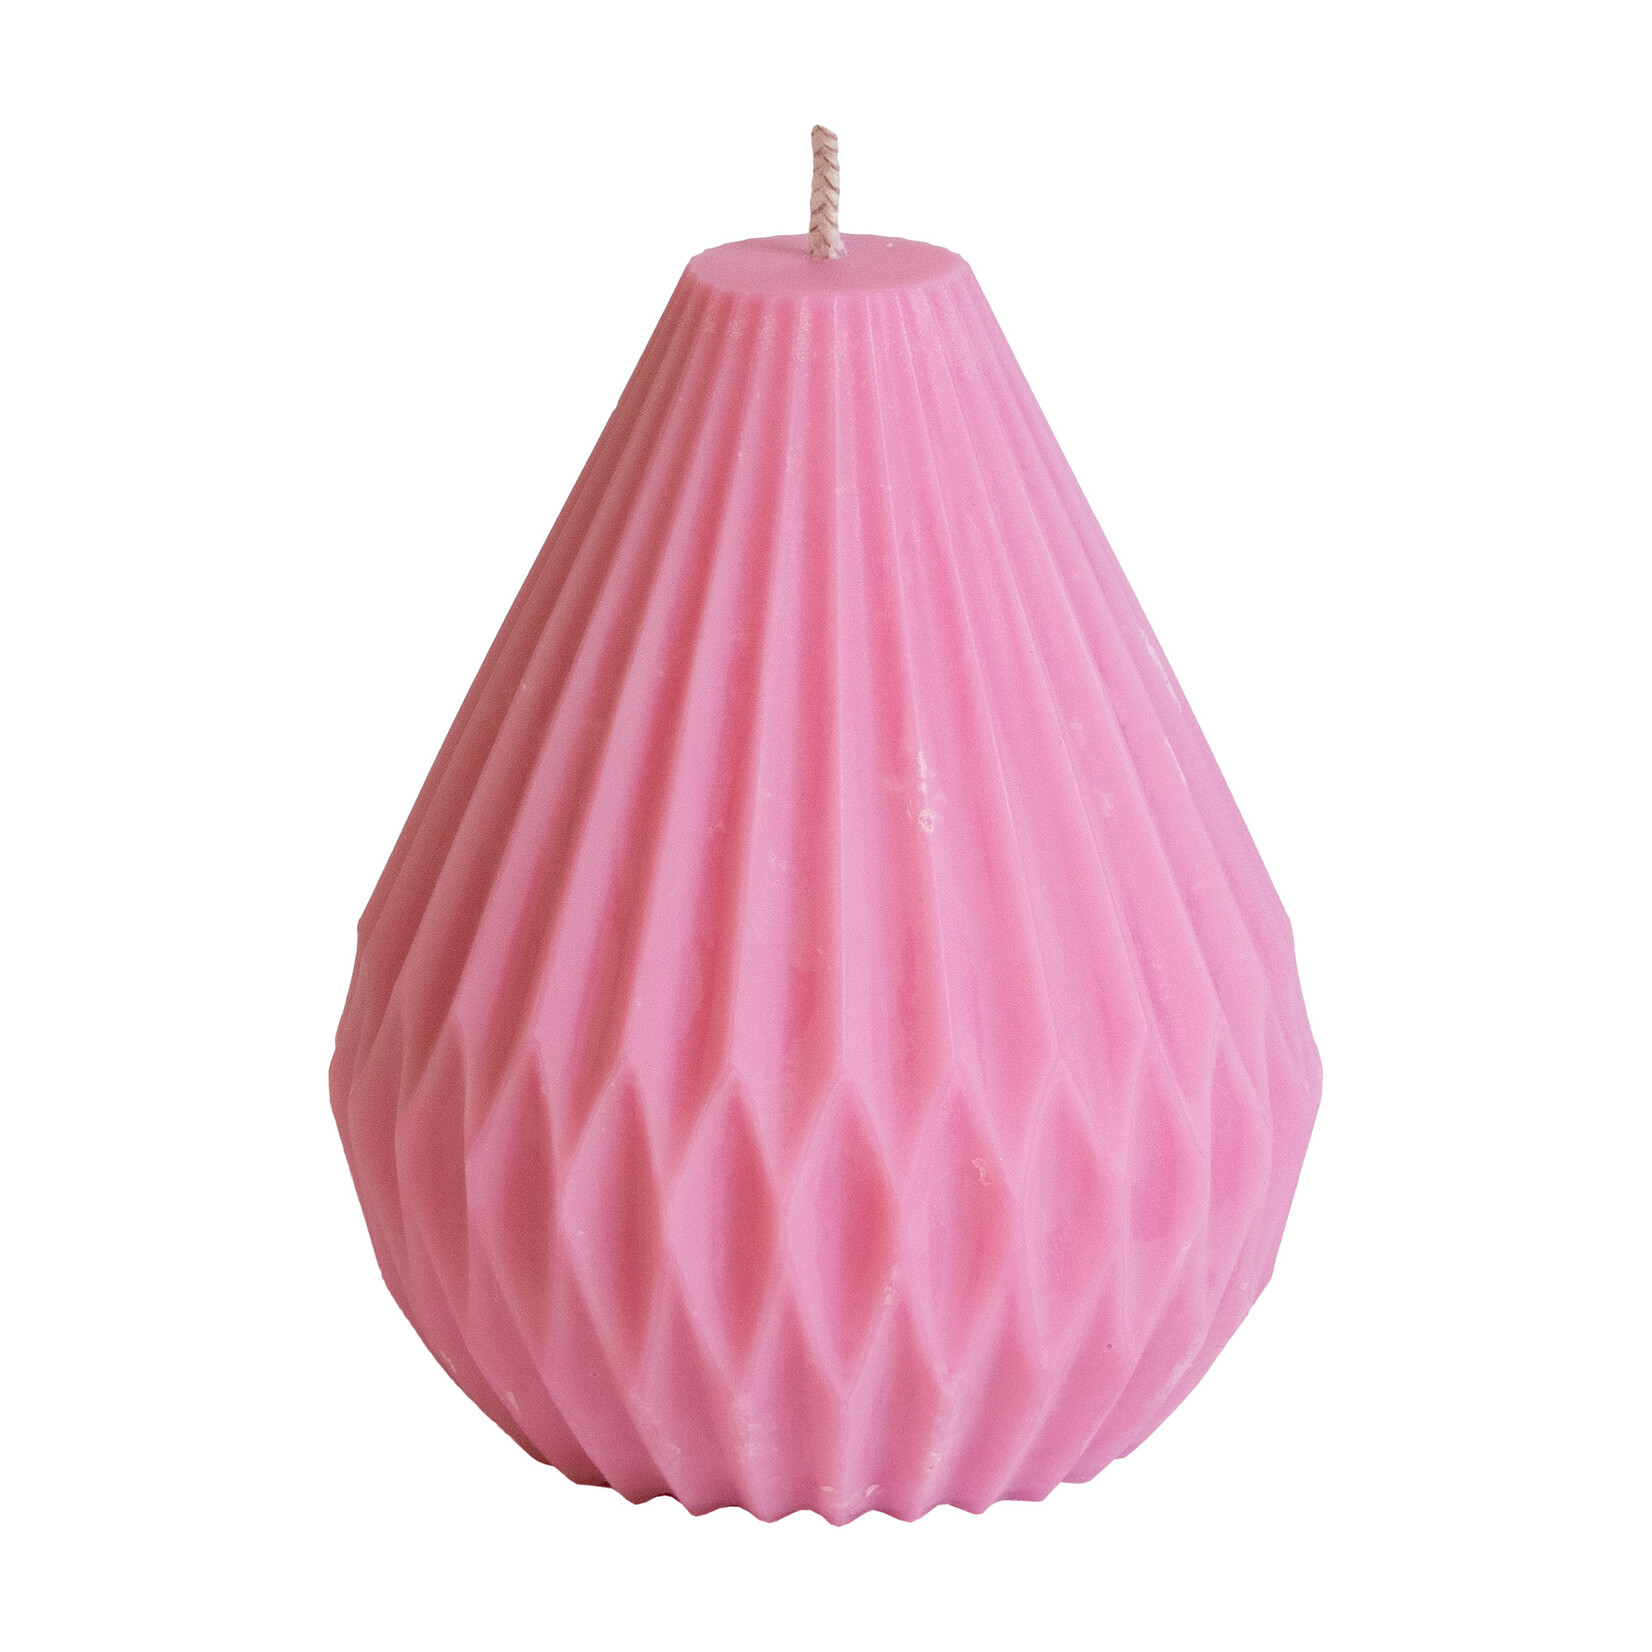 Rapeseed wax candle - pear-shaped - pink